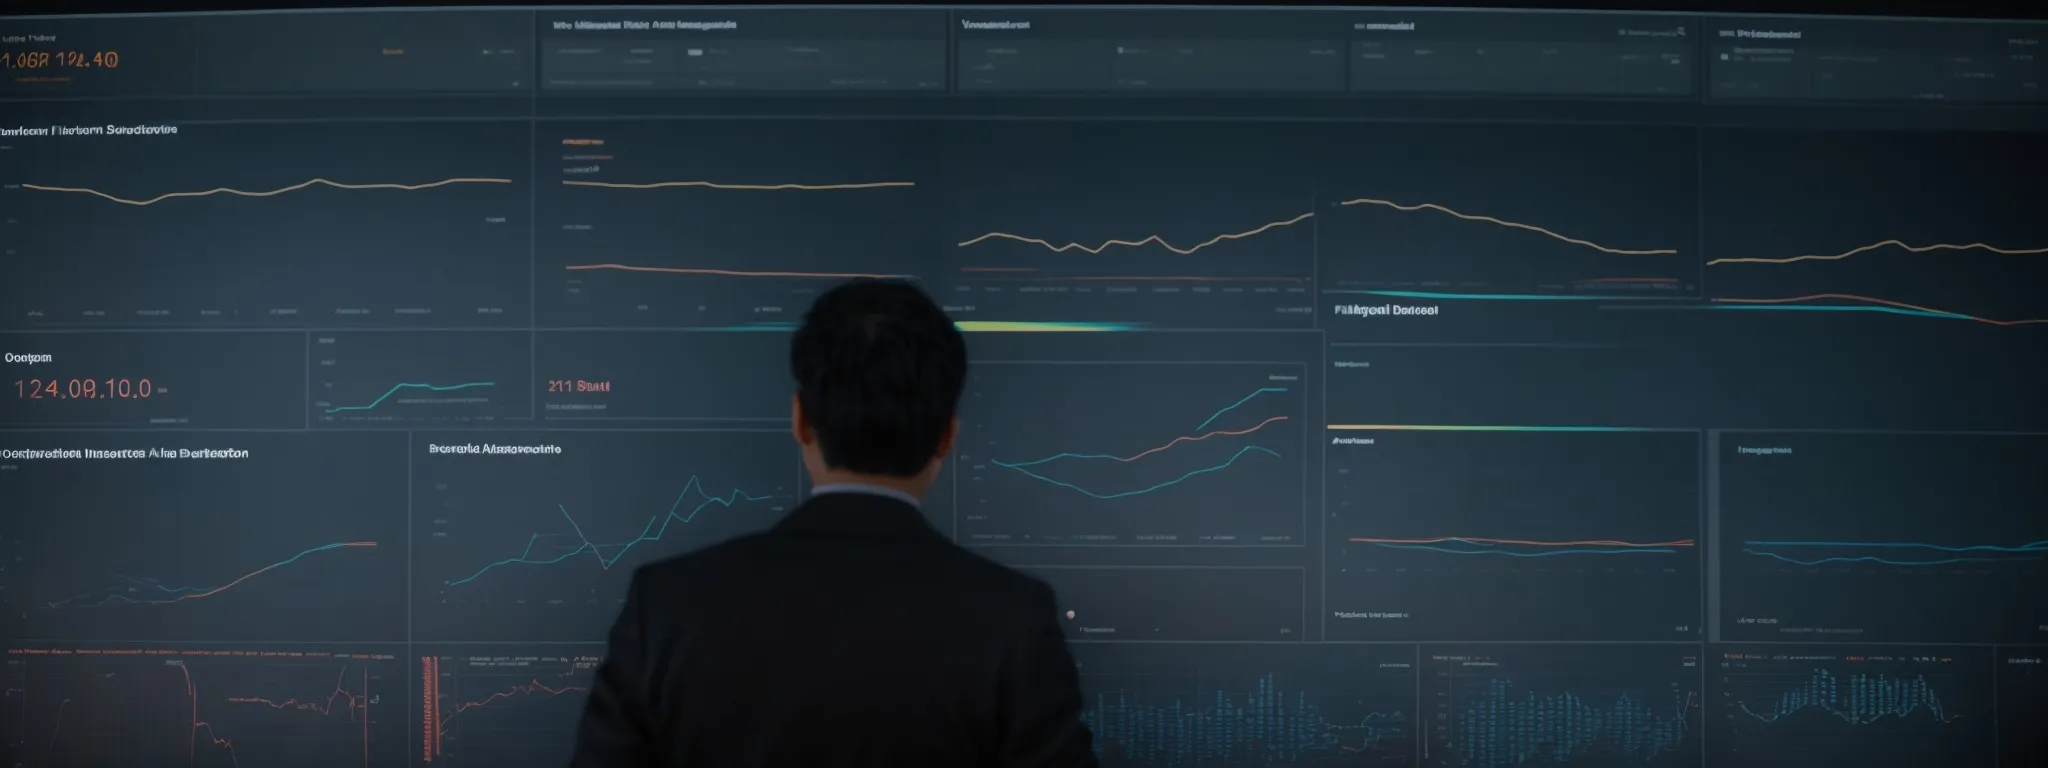 a person thoughtfully interacting with a large interactive analytics dashboard reflecting website performance and keyword trends.